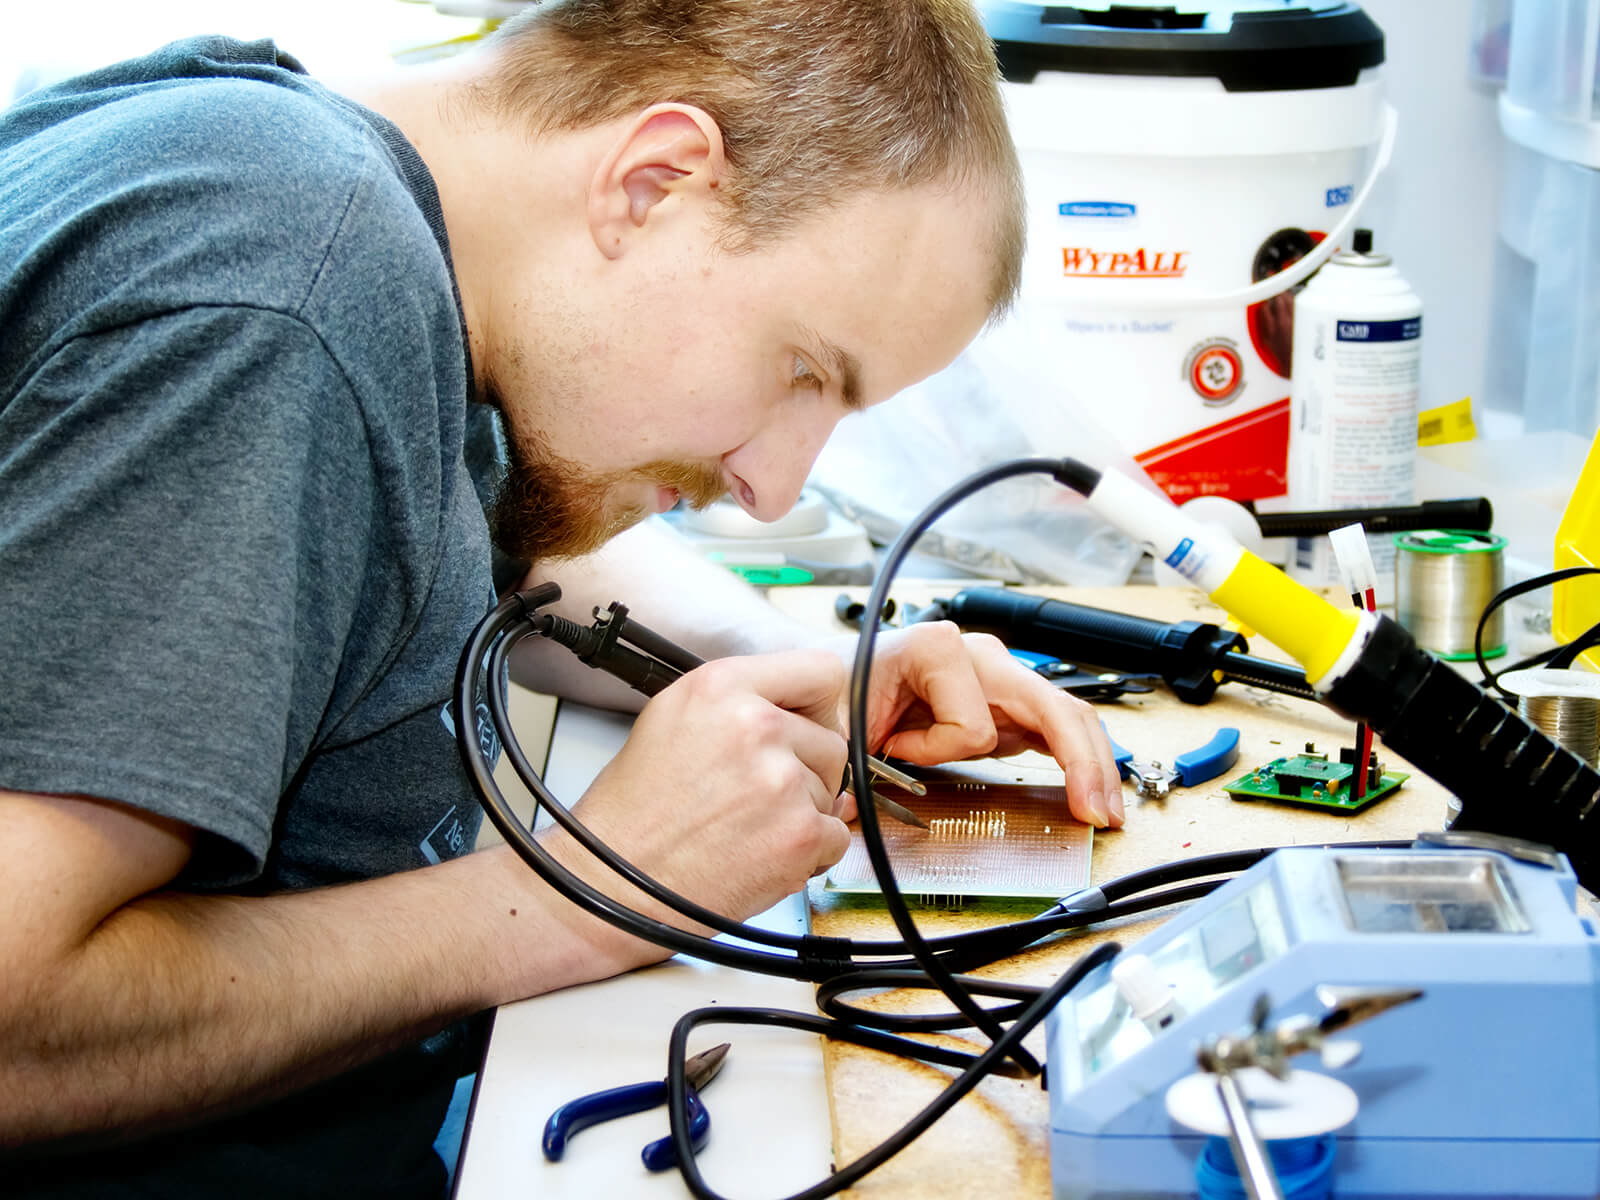 A student solders a circuit board on a desk cluttered with tools.